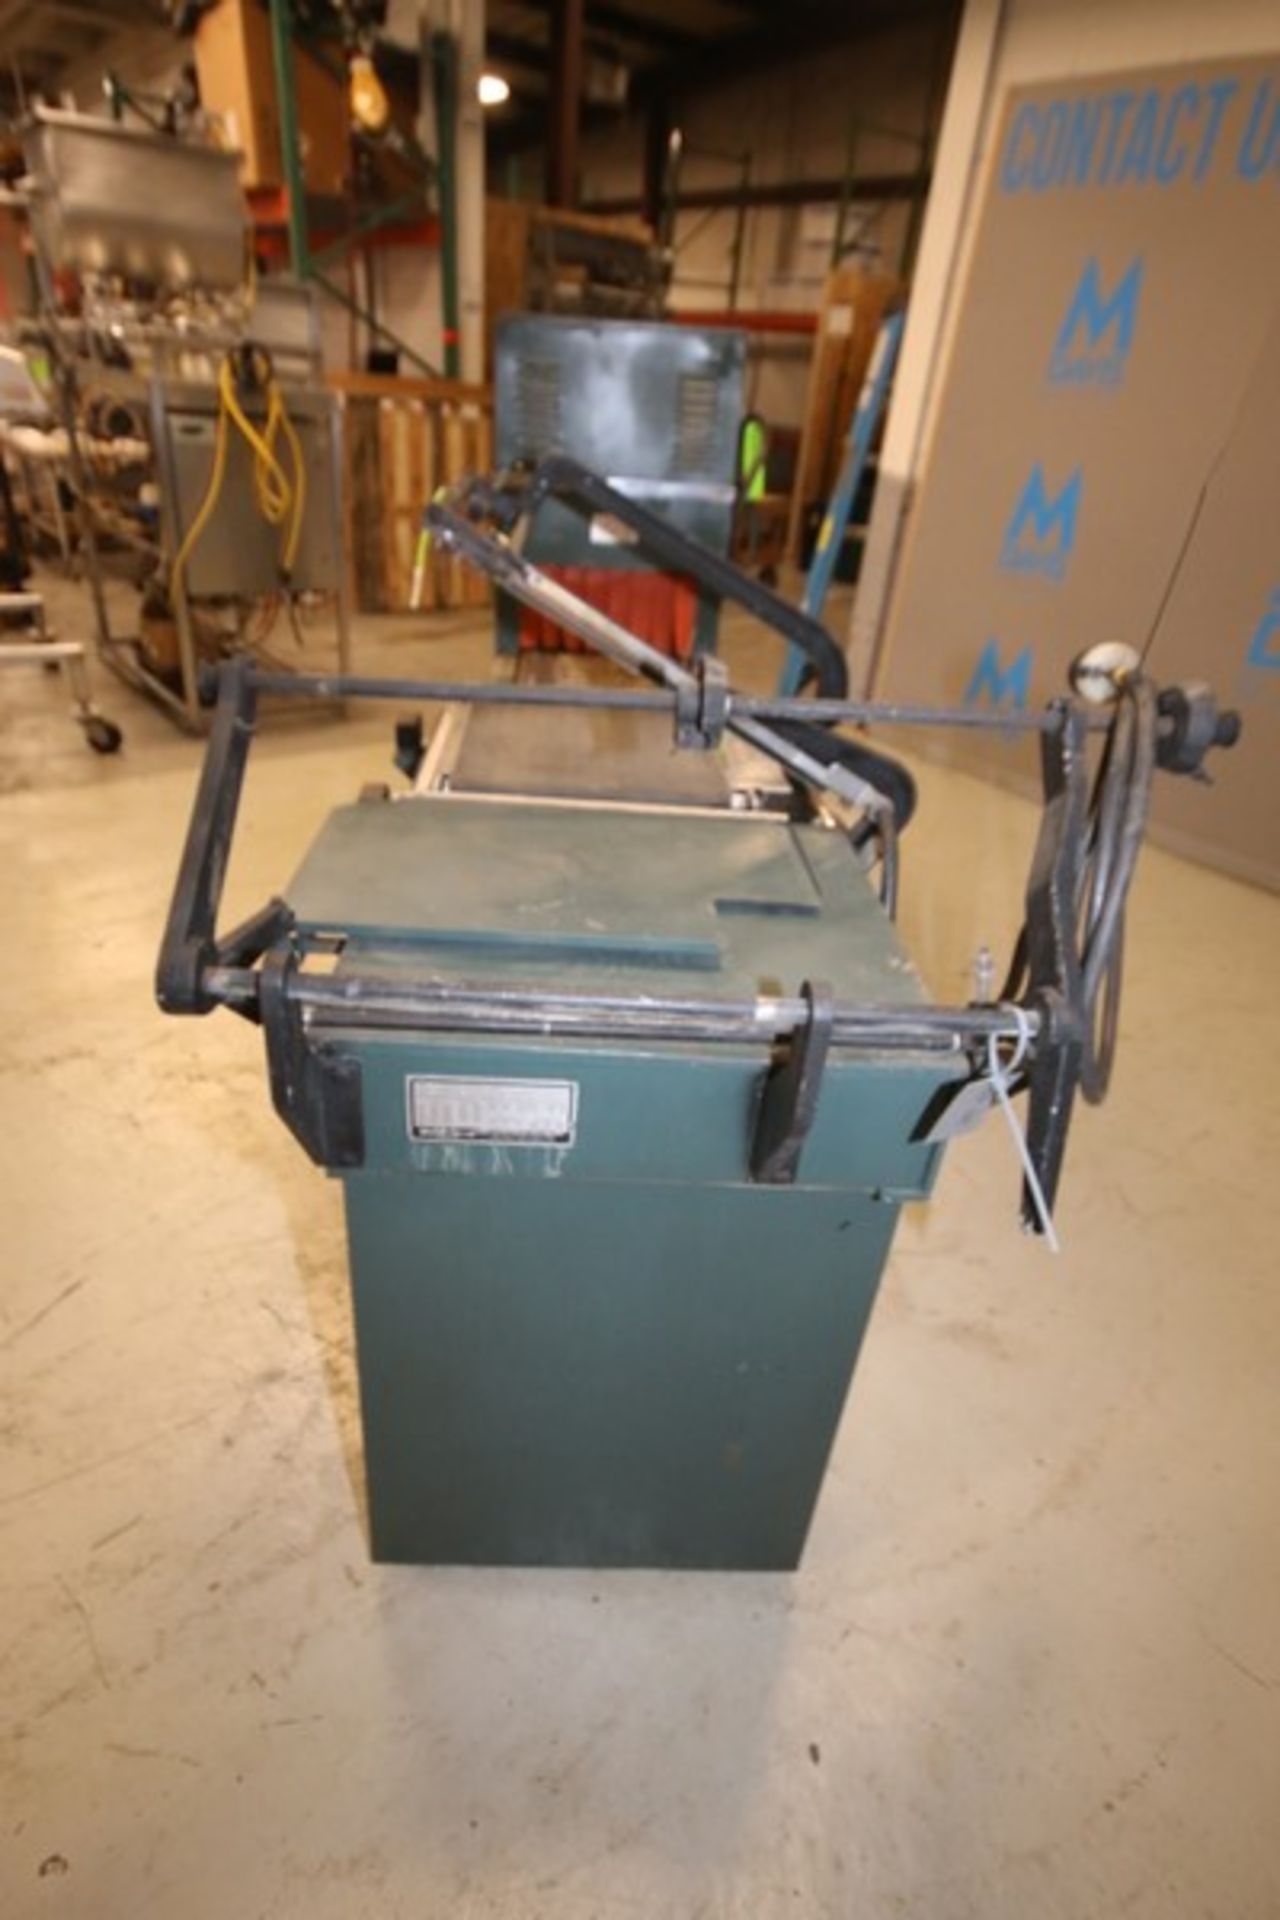 Weldotron Portable L - Bar Sealer, Model 6401, SN LW20764 with 20" W x 17" L Sealing Area, Shrink - Image 5 of 13